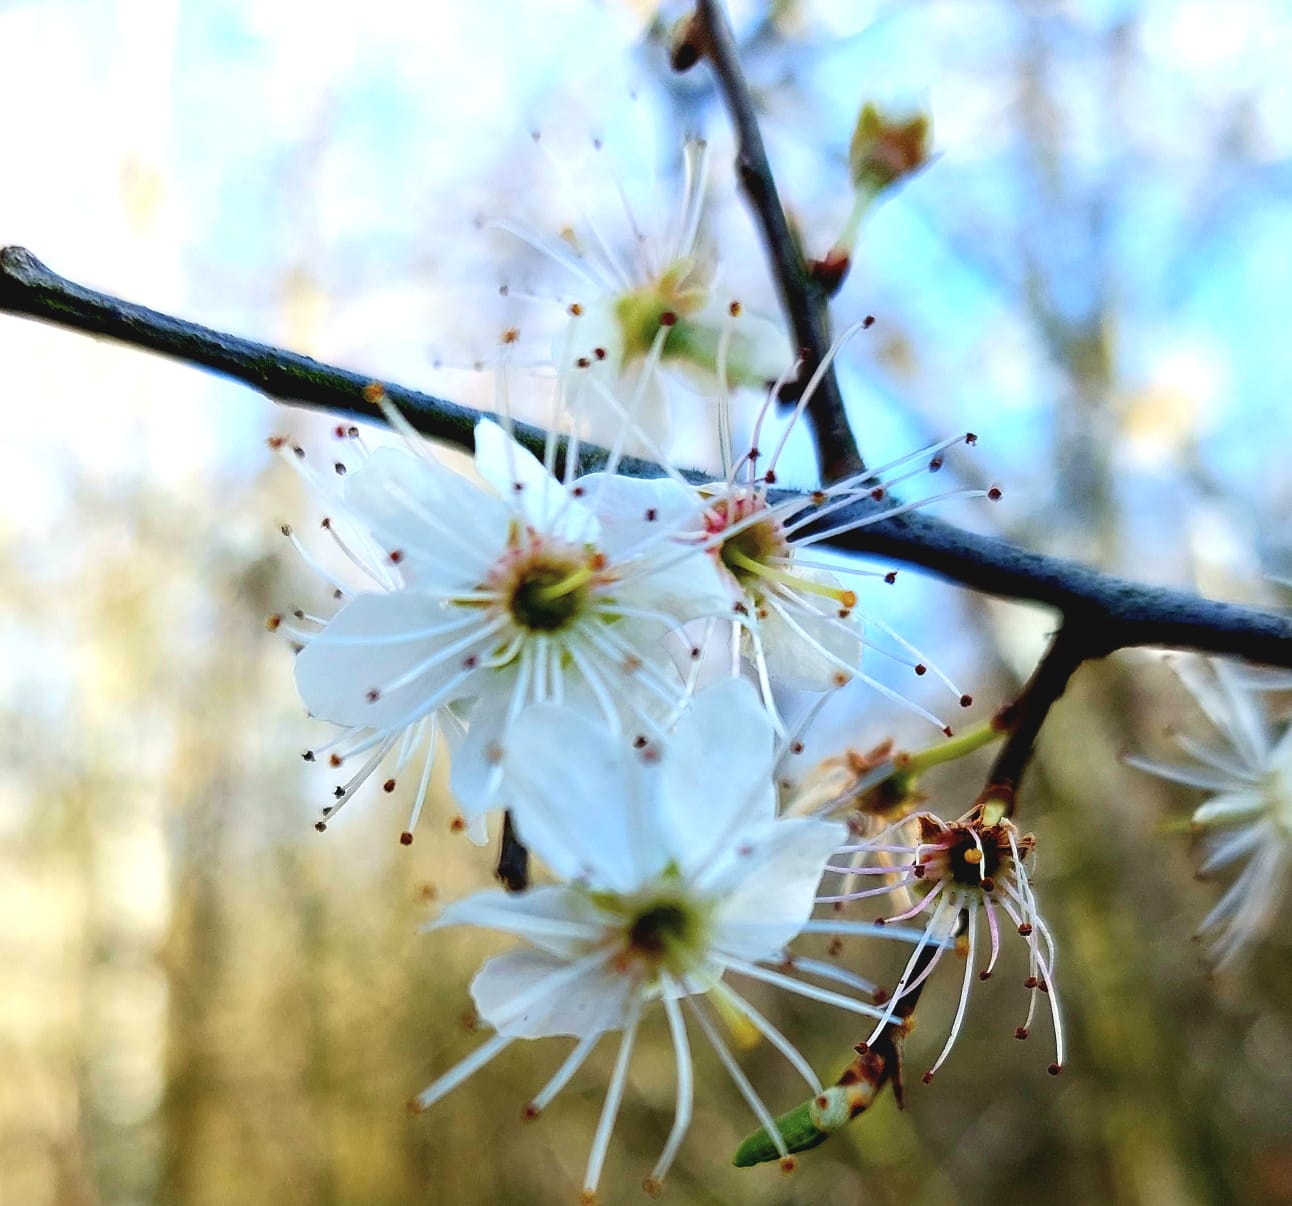 A close-up photograph of white blossom on a branch